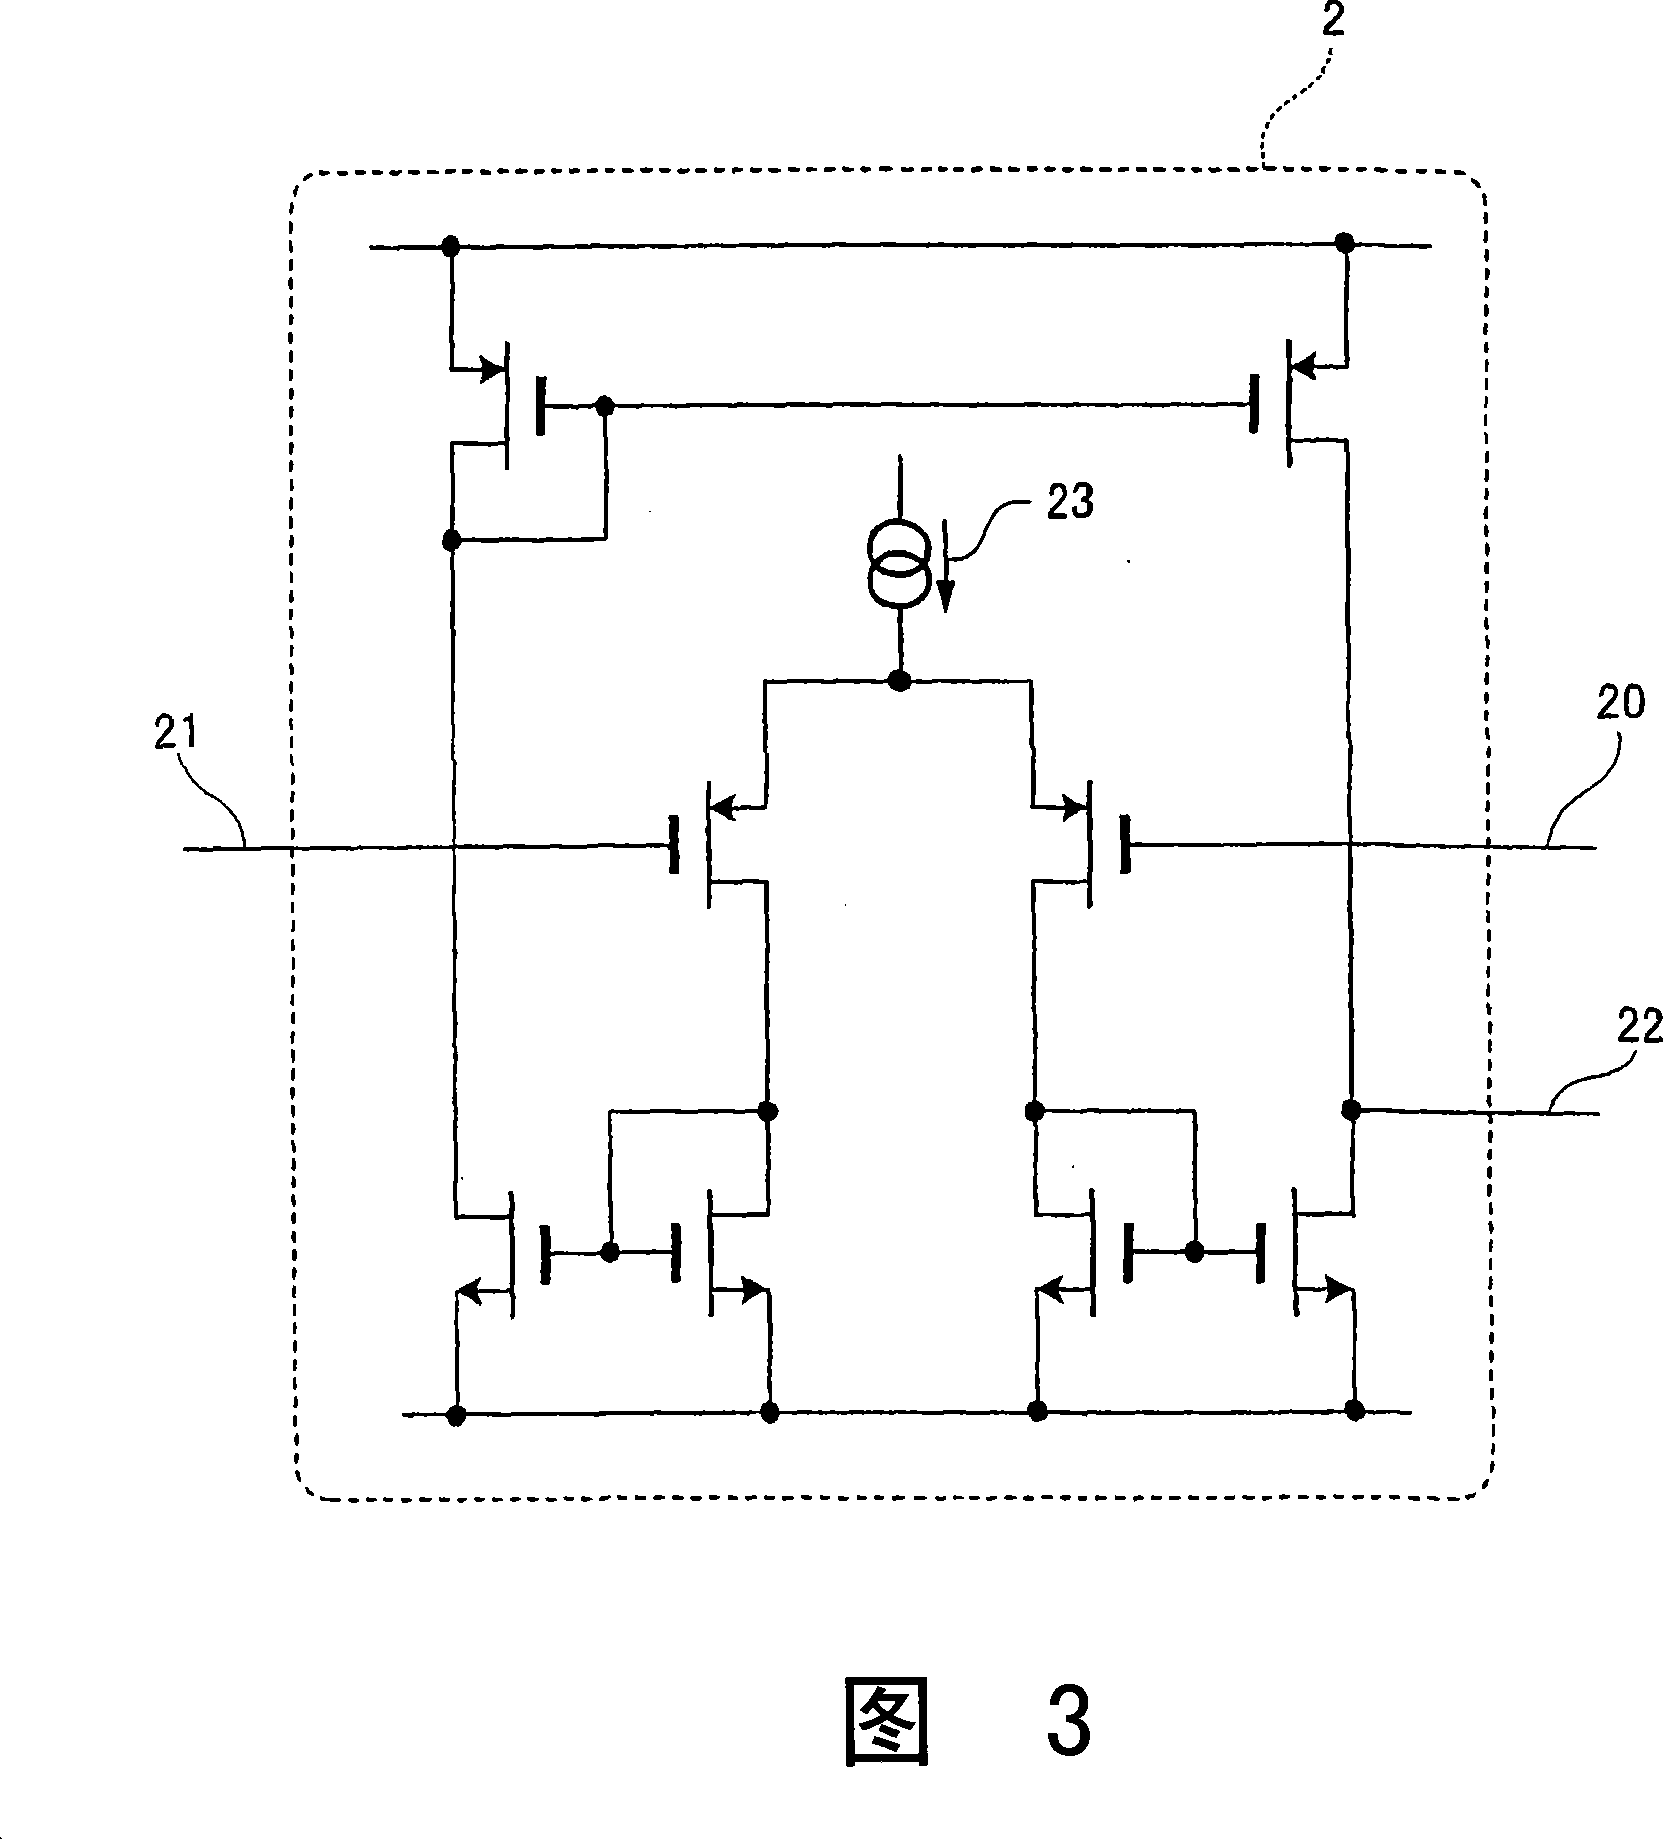 Triangle wave generating circuit and PWM modulation circuit